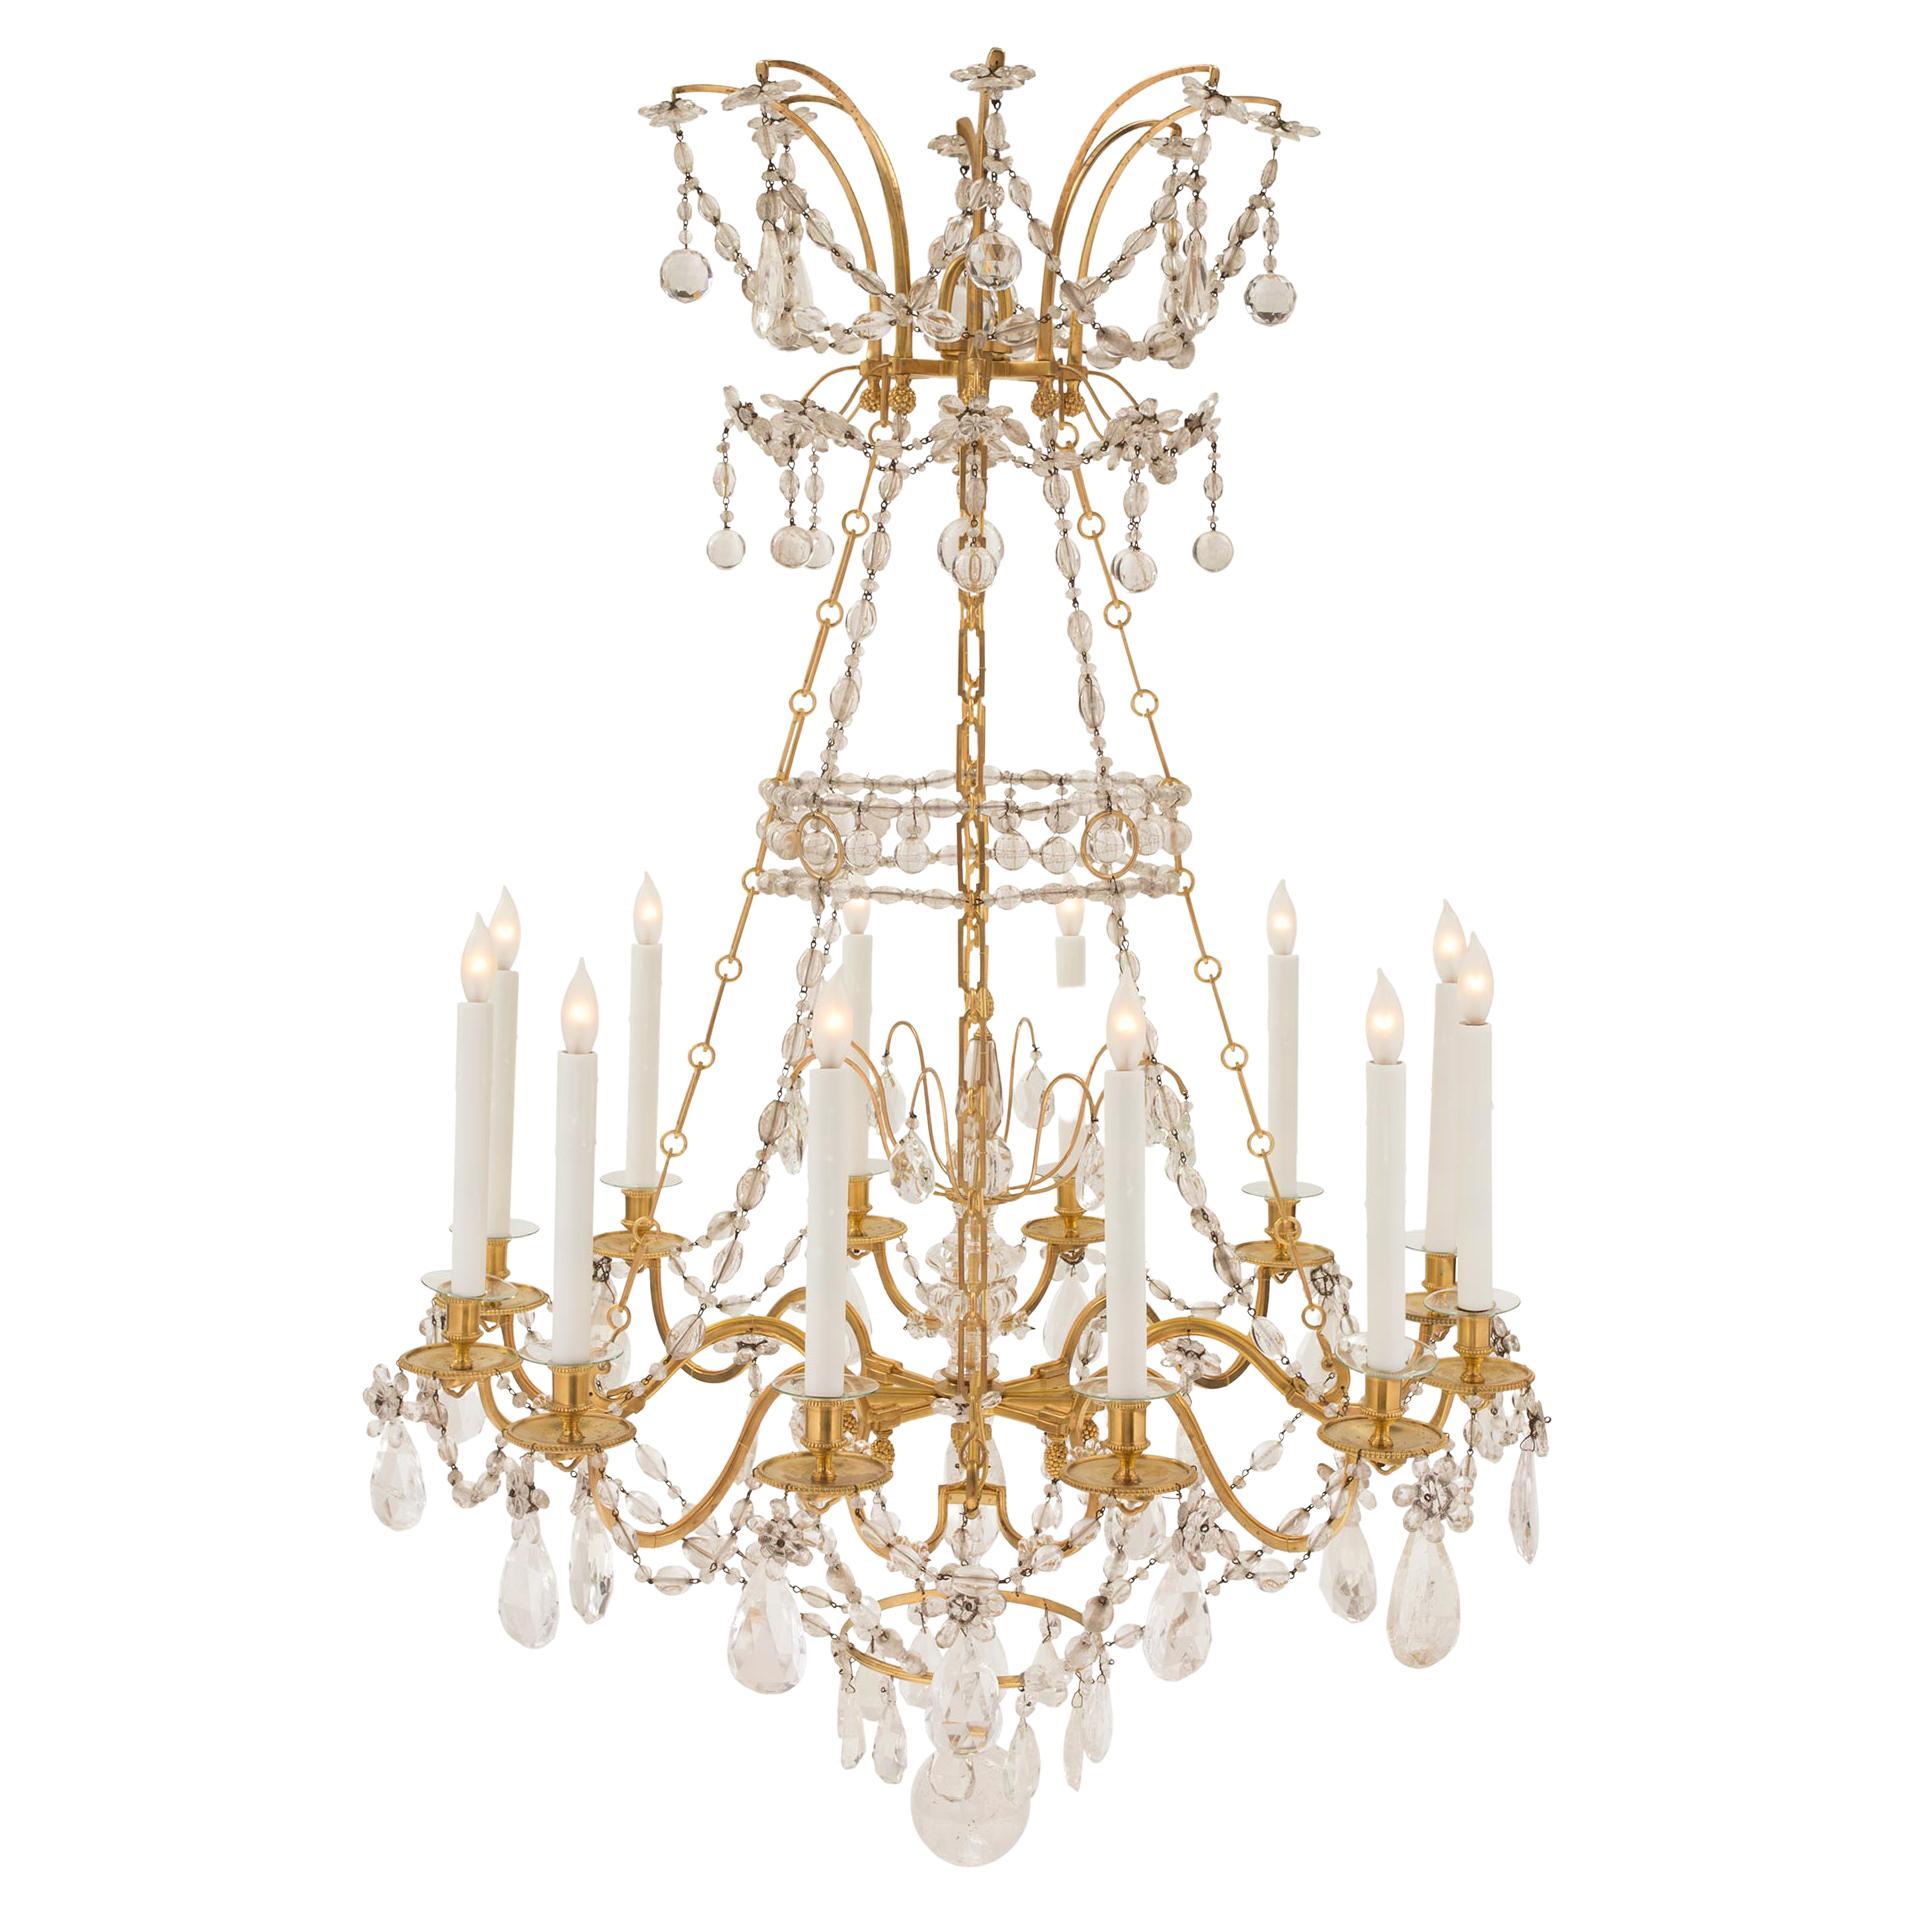 French 19th Century Louis XVI Style Ormolu, Baccarat and Rock Crystal Chandelier For Sale